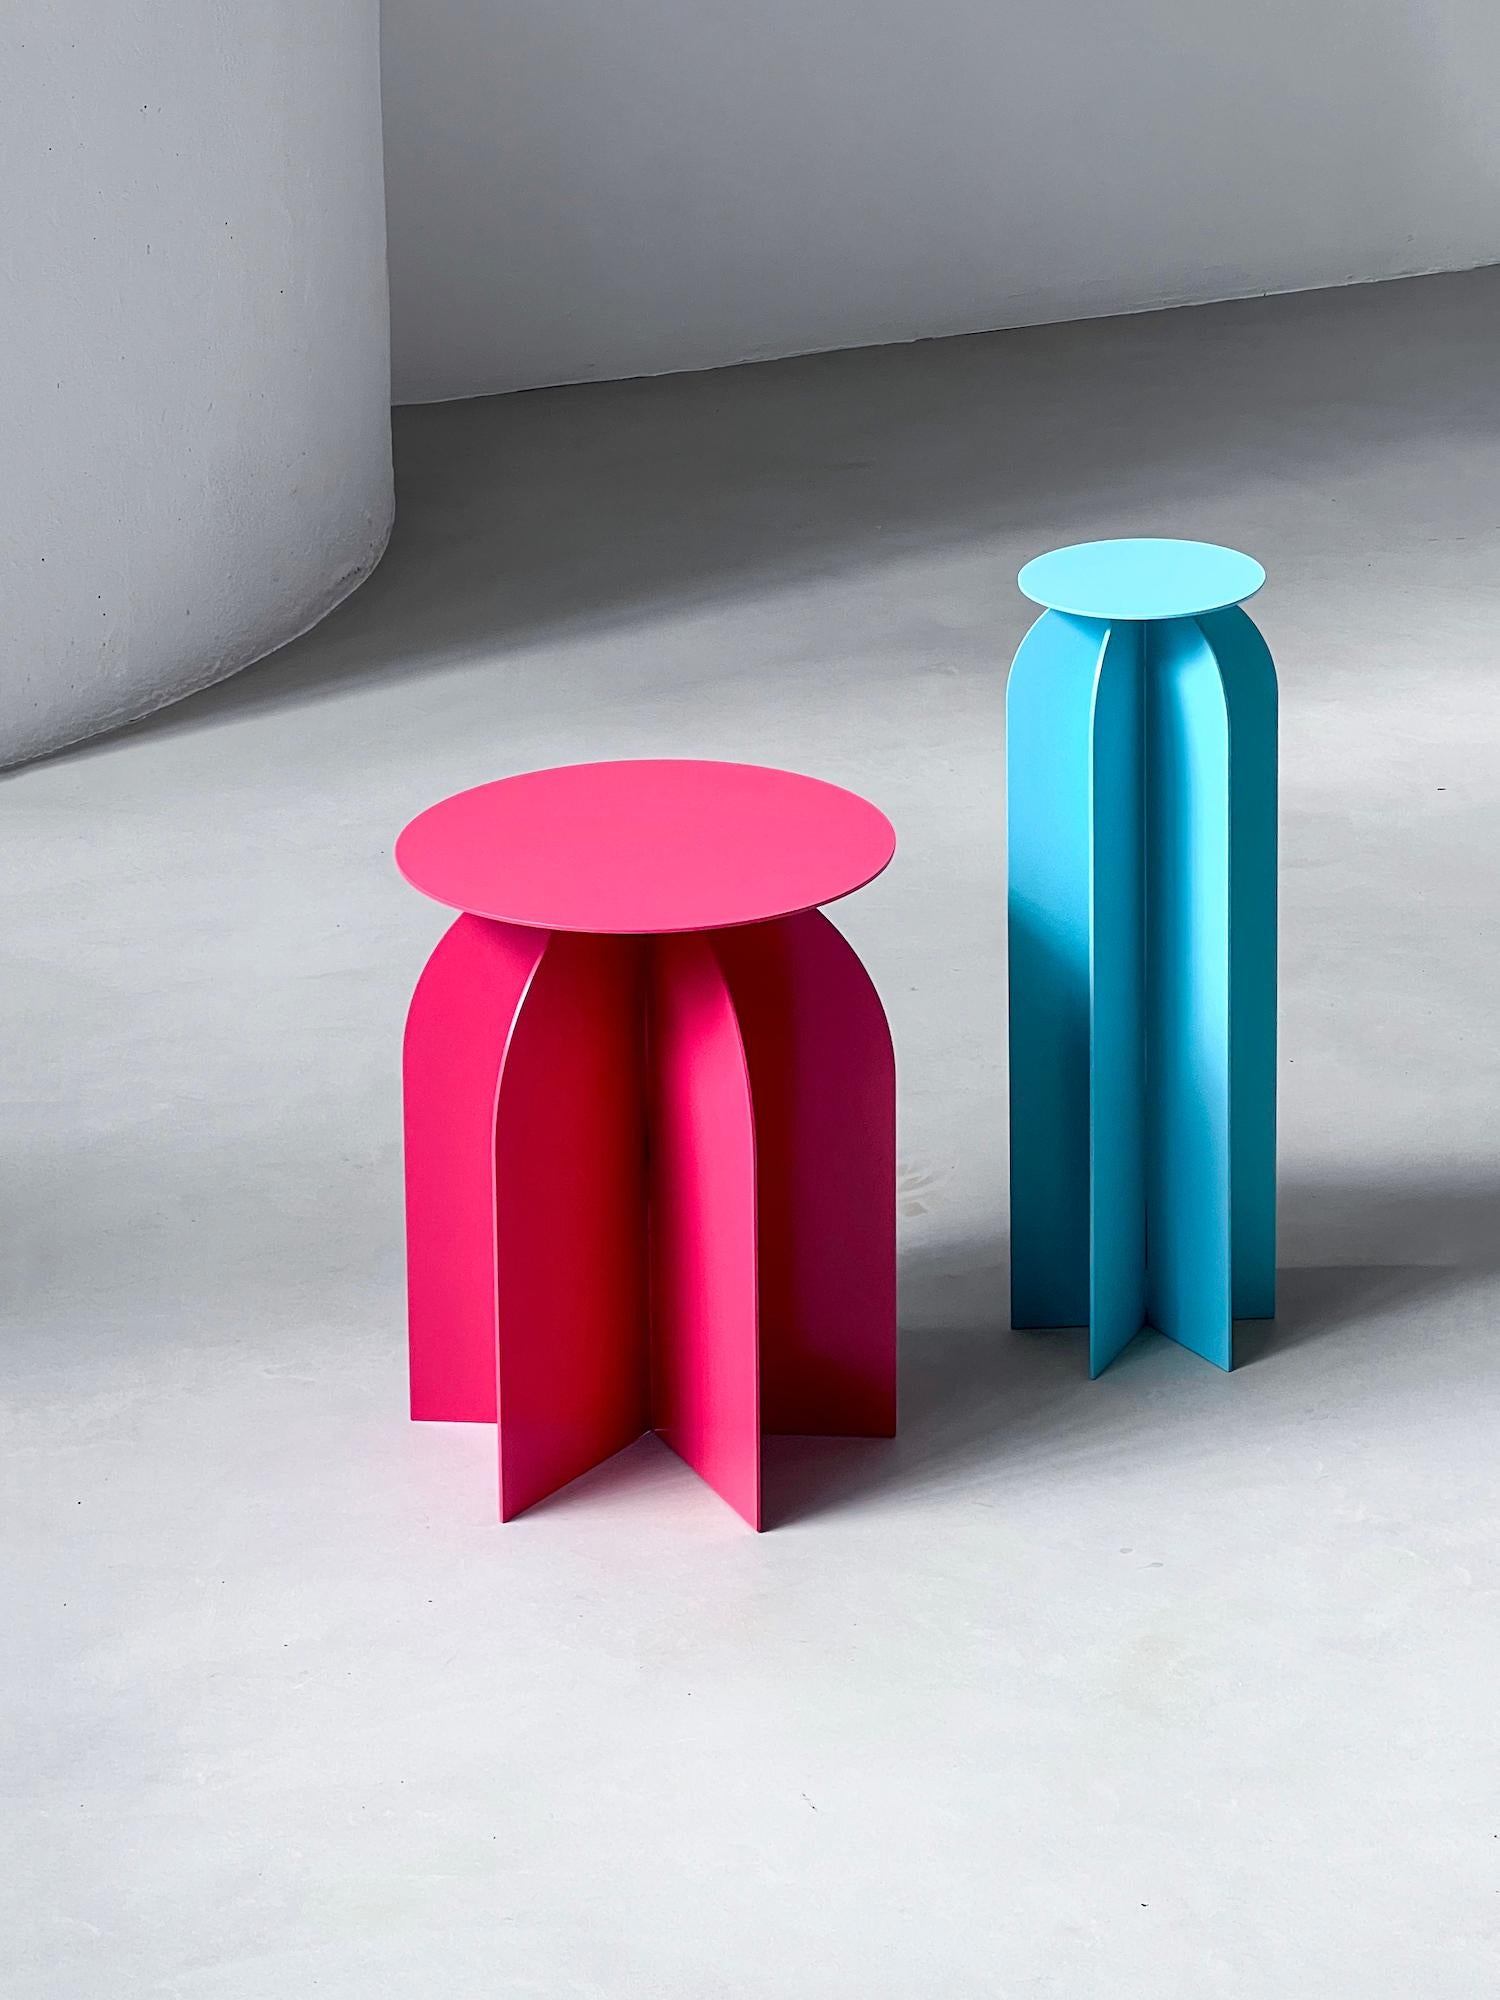 Decorative Side Table - Sculptural End Table - Mini Living Room Table

The Palladium Side Table is one of our most loved and best selling products. This year, on occasion of the 2024 Milano Design Week, we have launched a different version of its